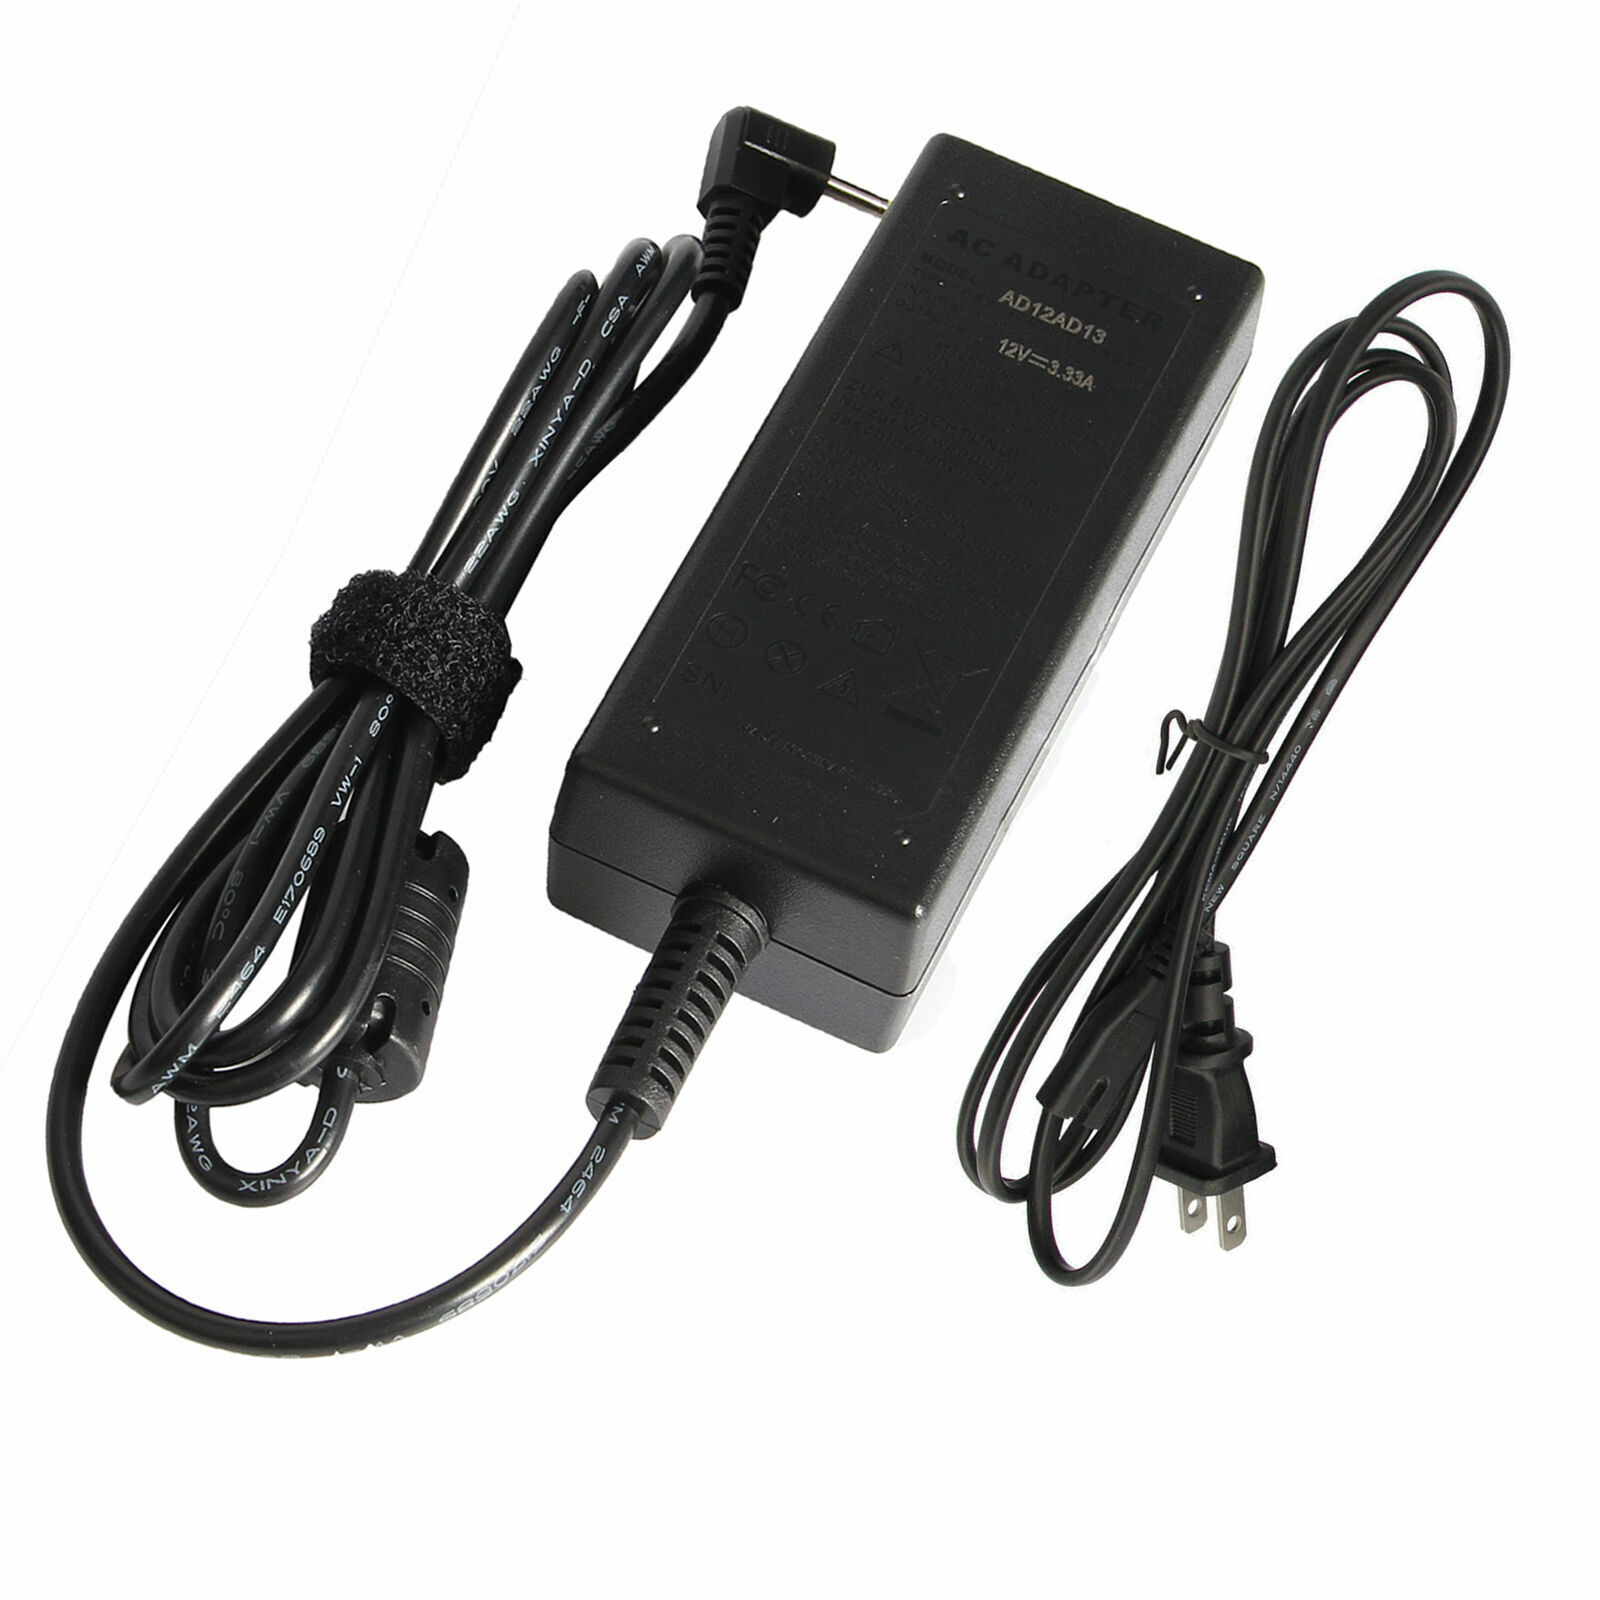 AC Adapter Charger For Samsung Series 3 Chromebook XE303C12 Google Chrome OS US